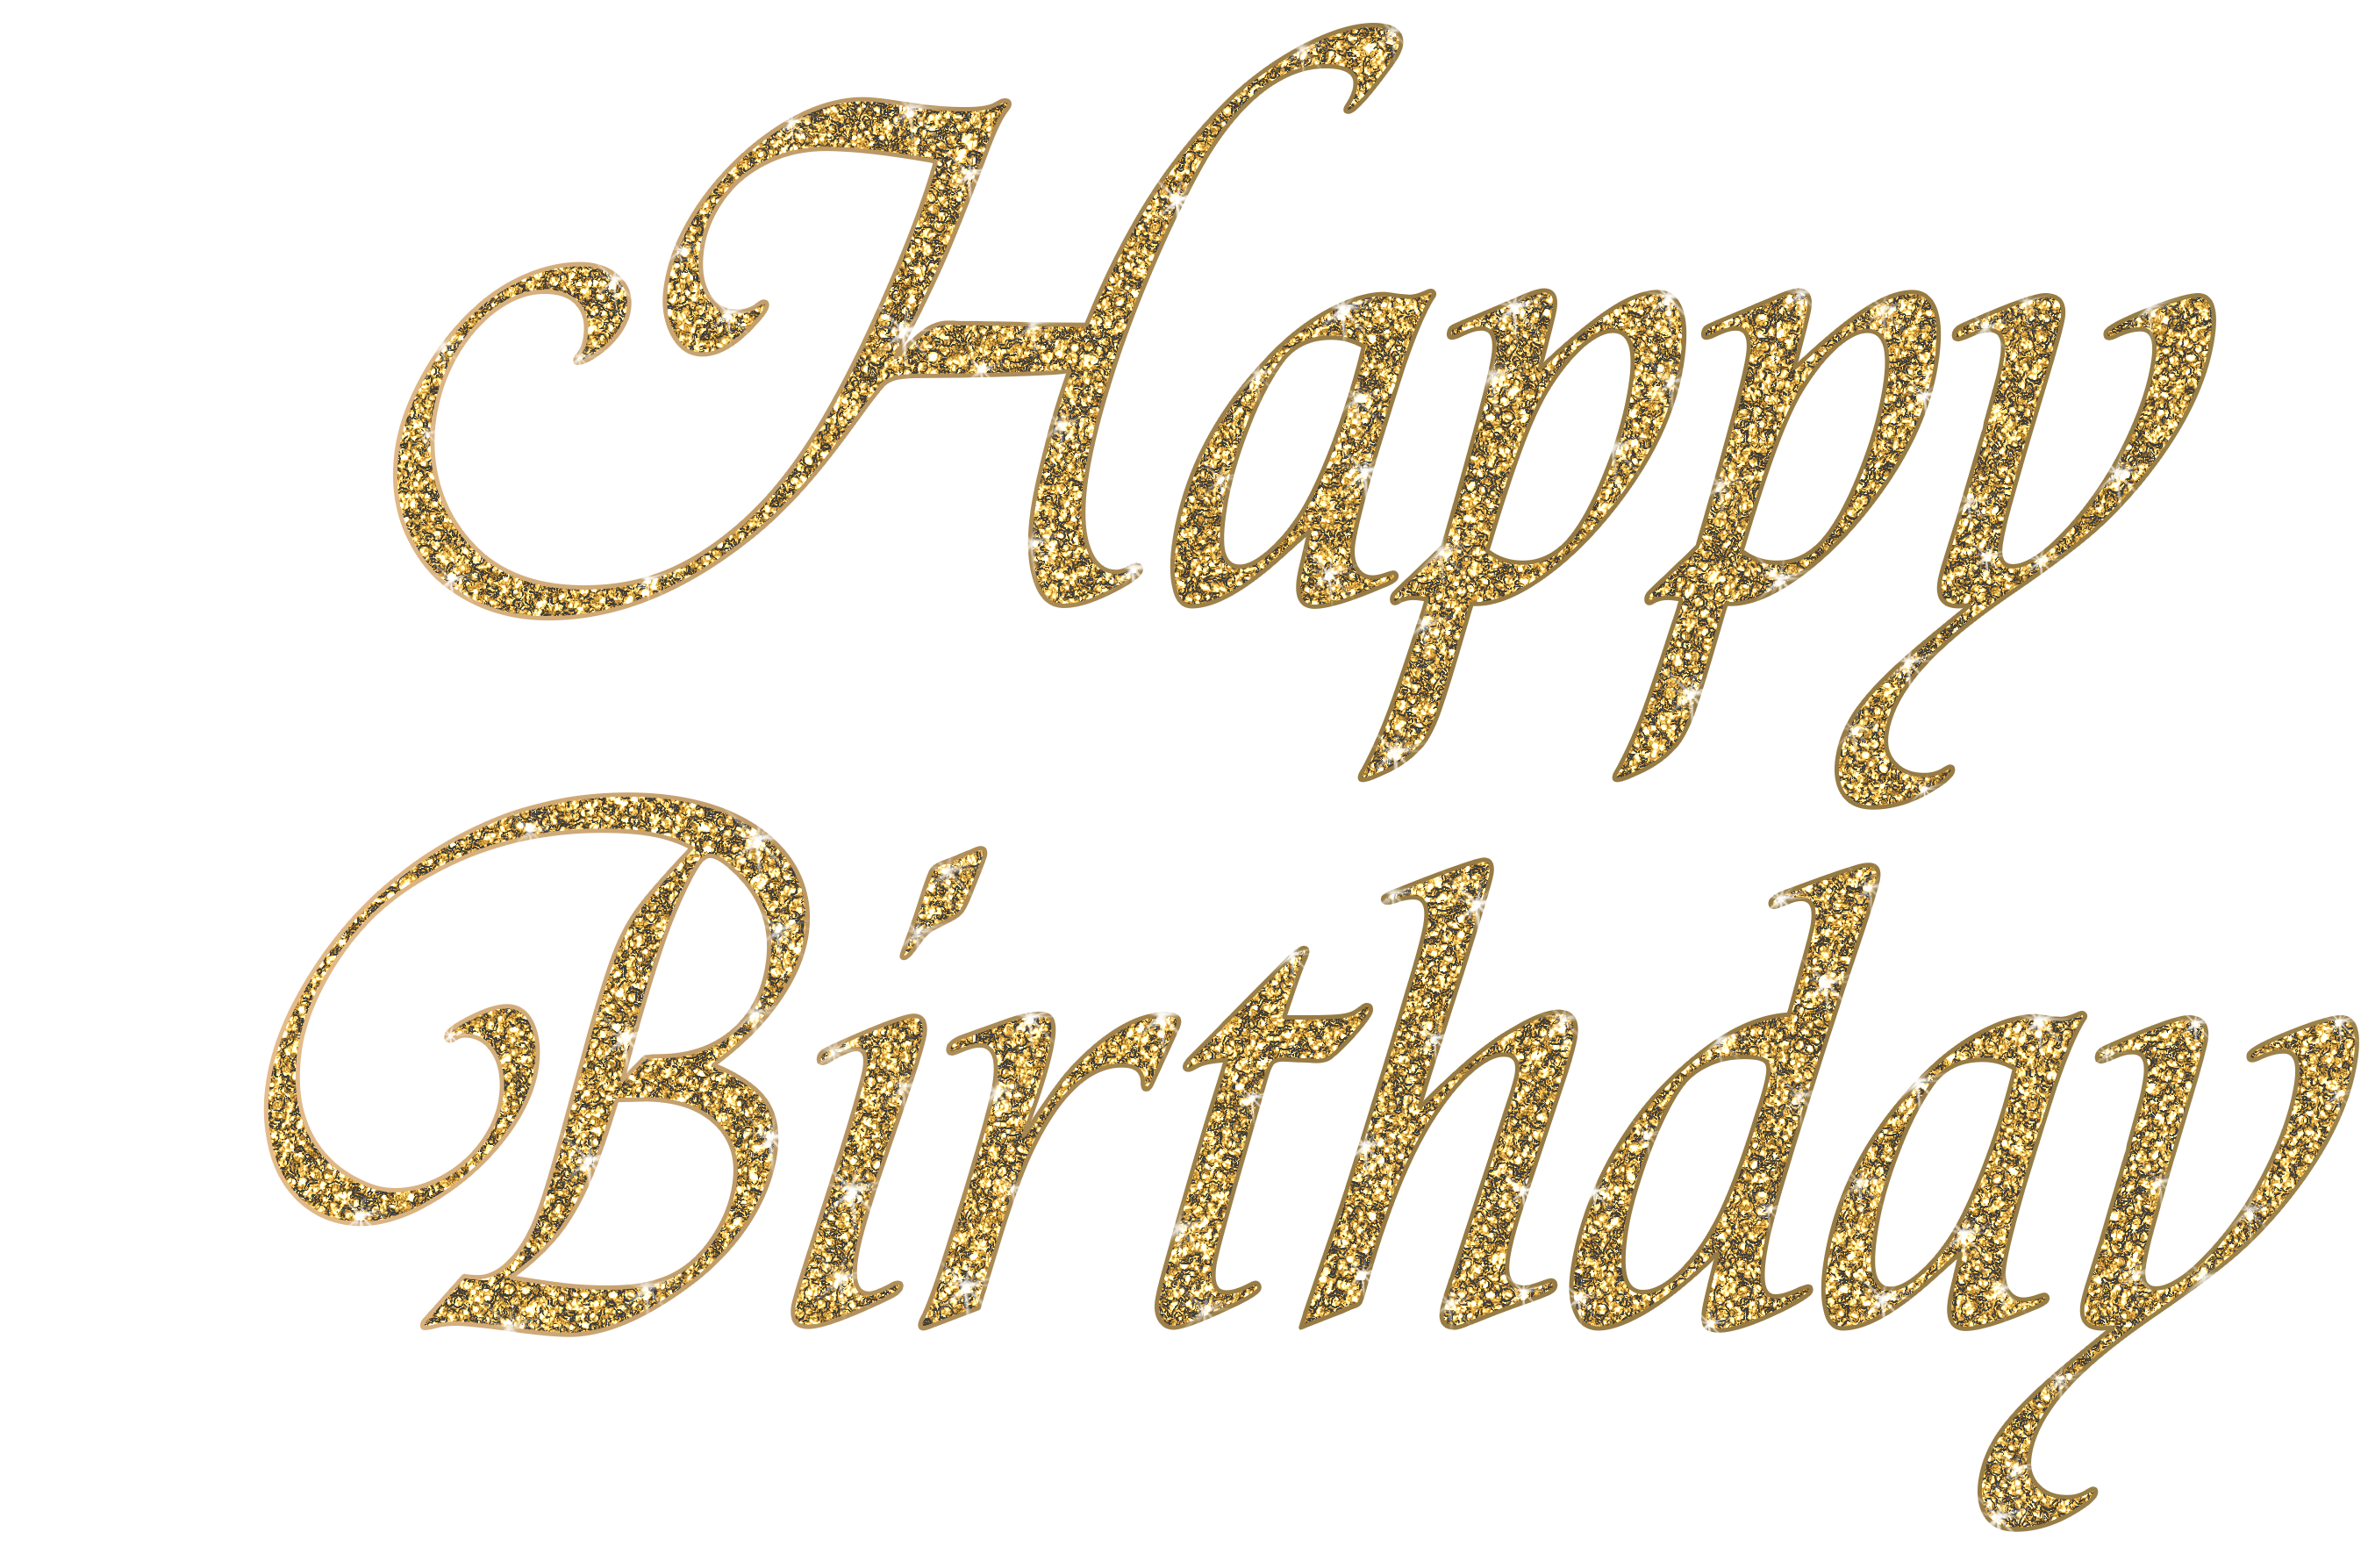 Free Happy Birthday Gold Png Download Free Clip Art Free Clip Art On Clipart Library